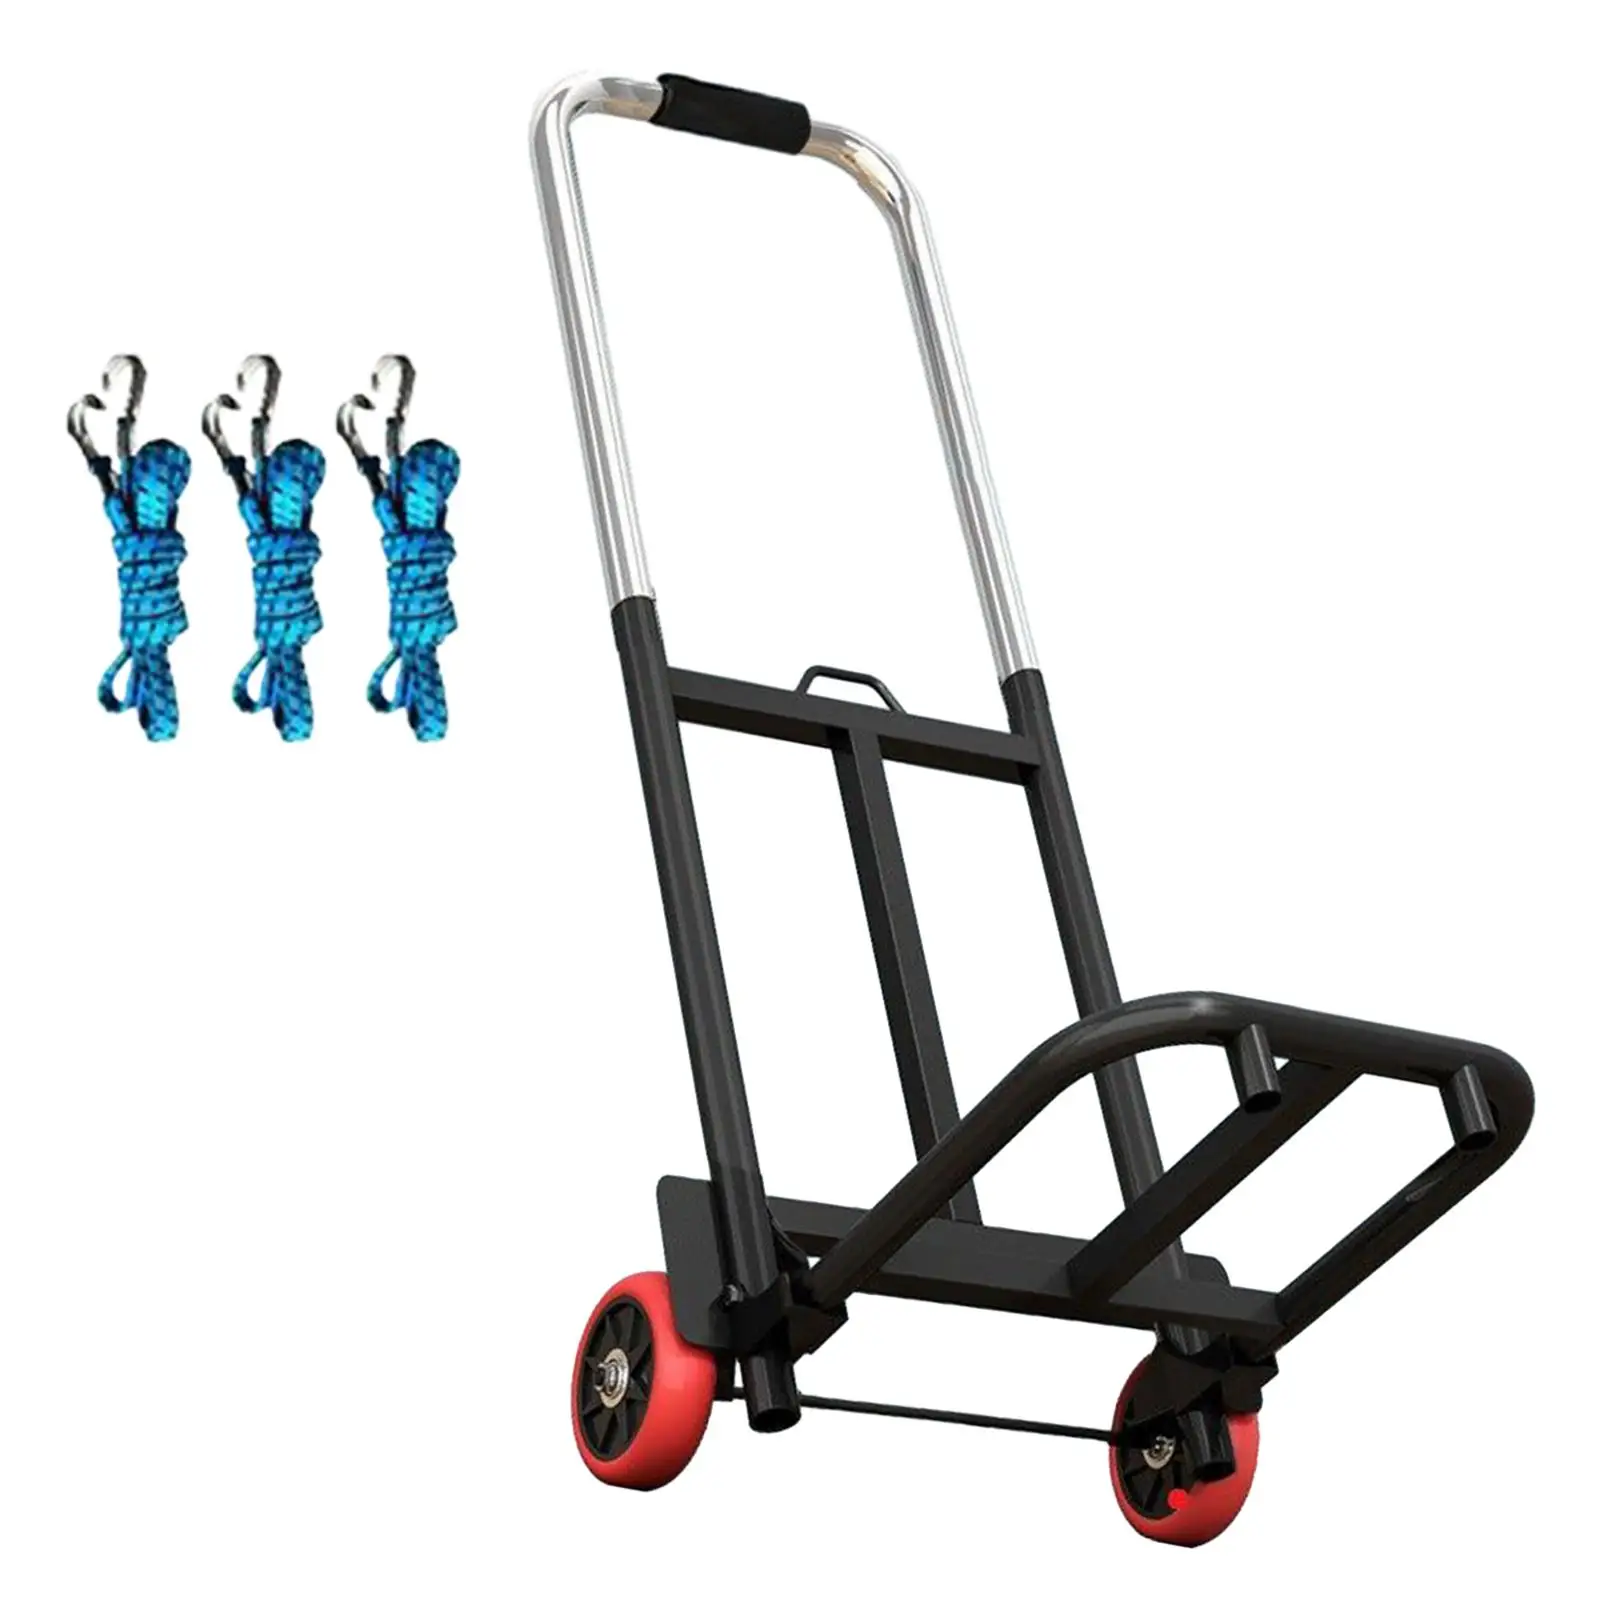 Foldable Hand Truck Luggage Hand Cart Adjustable Handle Retractable 20-31inch Metal Frame Trade Show Exhibitors Durable